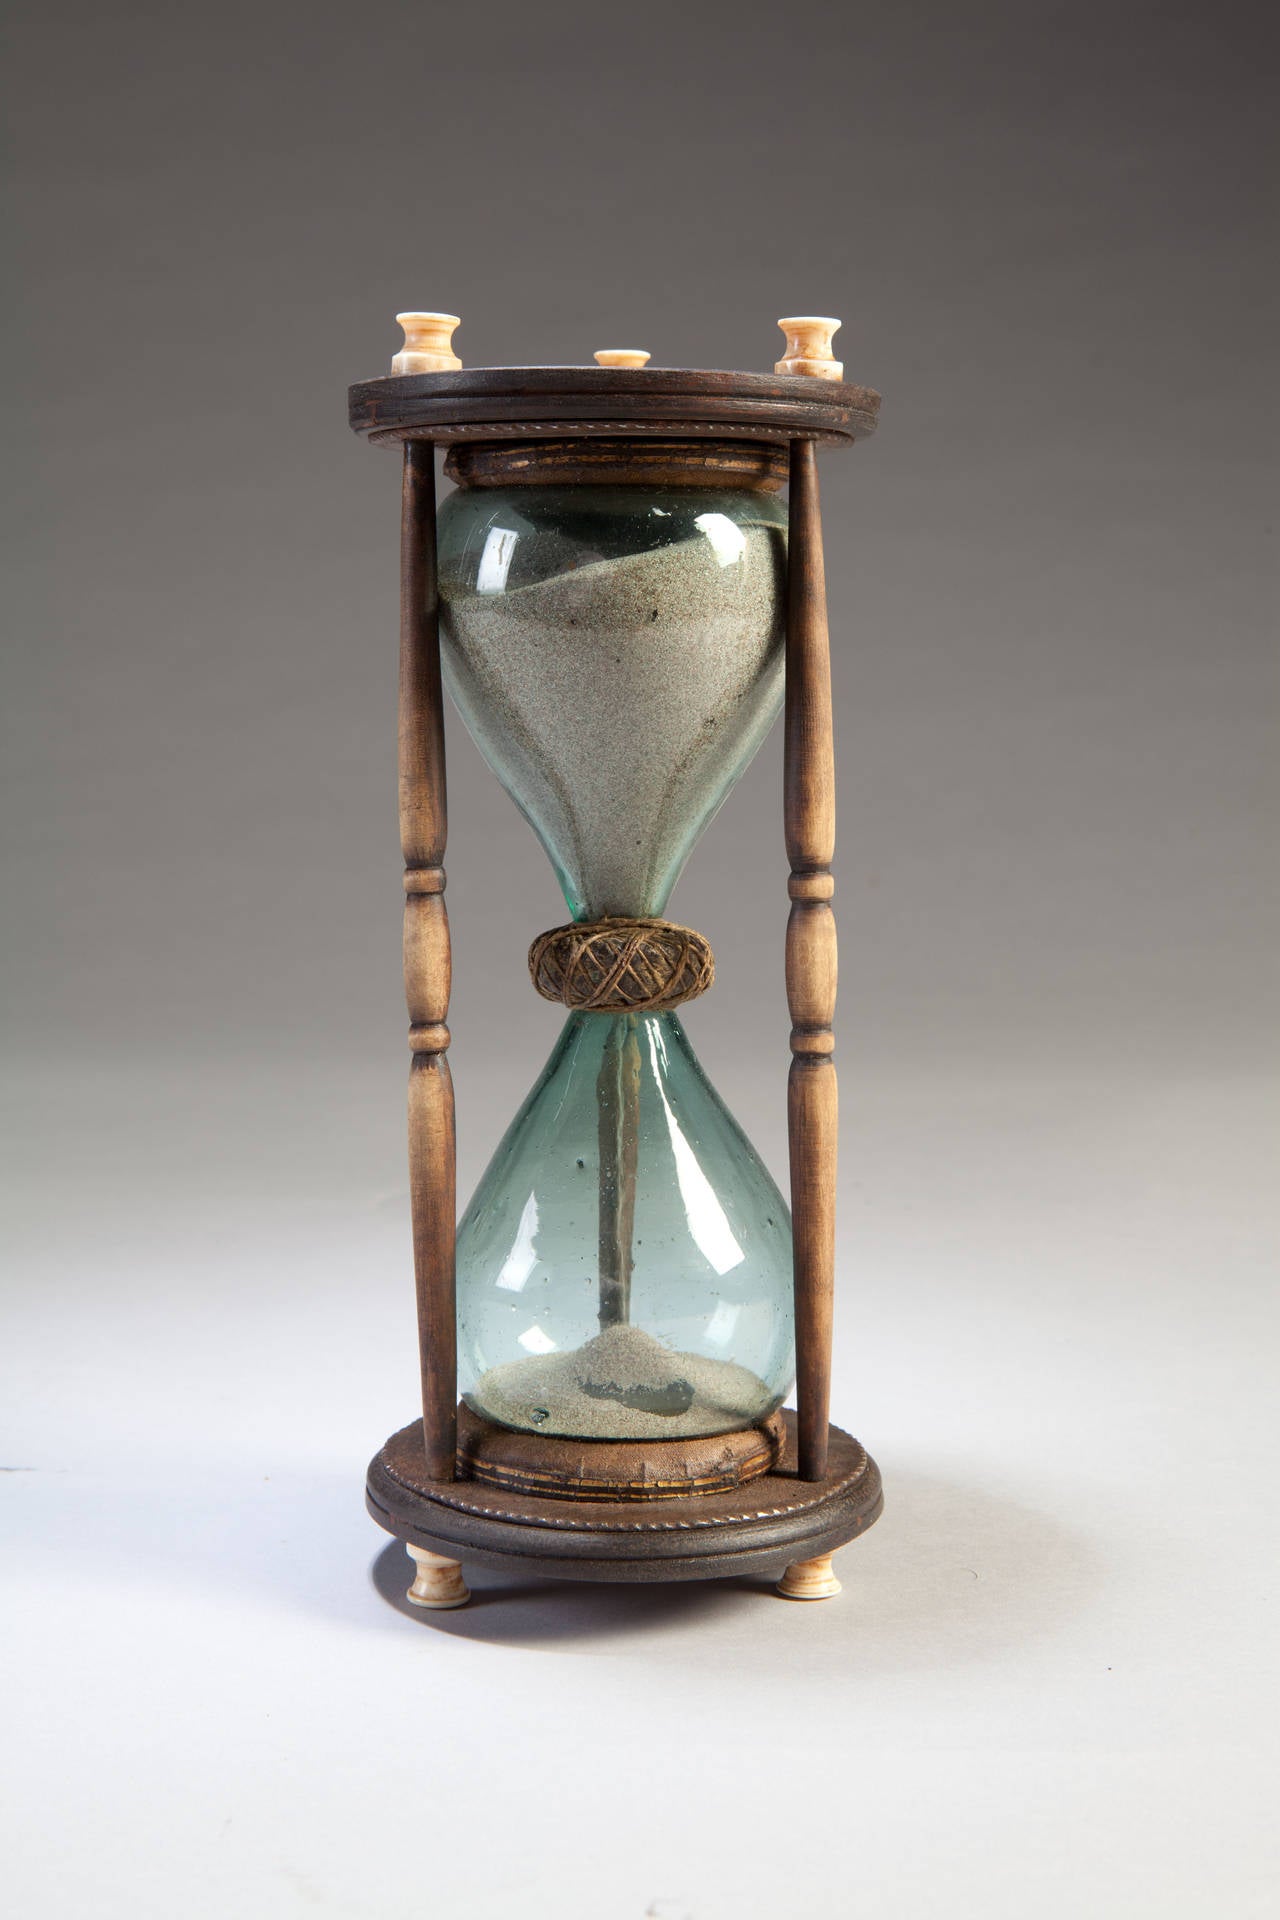 An early 19th century glass sand timer. The glass is supported on leather pads and surmounted and supported by wooden blocks with bone finials. The sides are stained bone double balusters. Probably Flemish, circa 1830.